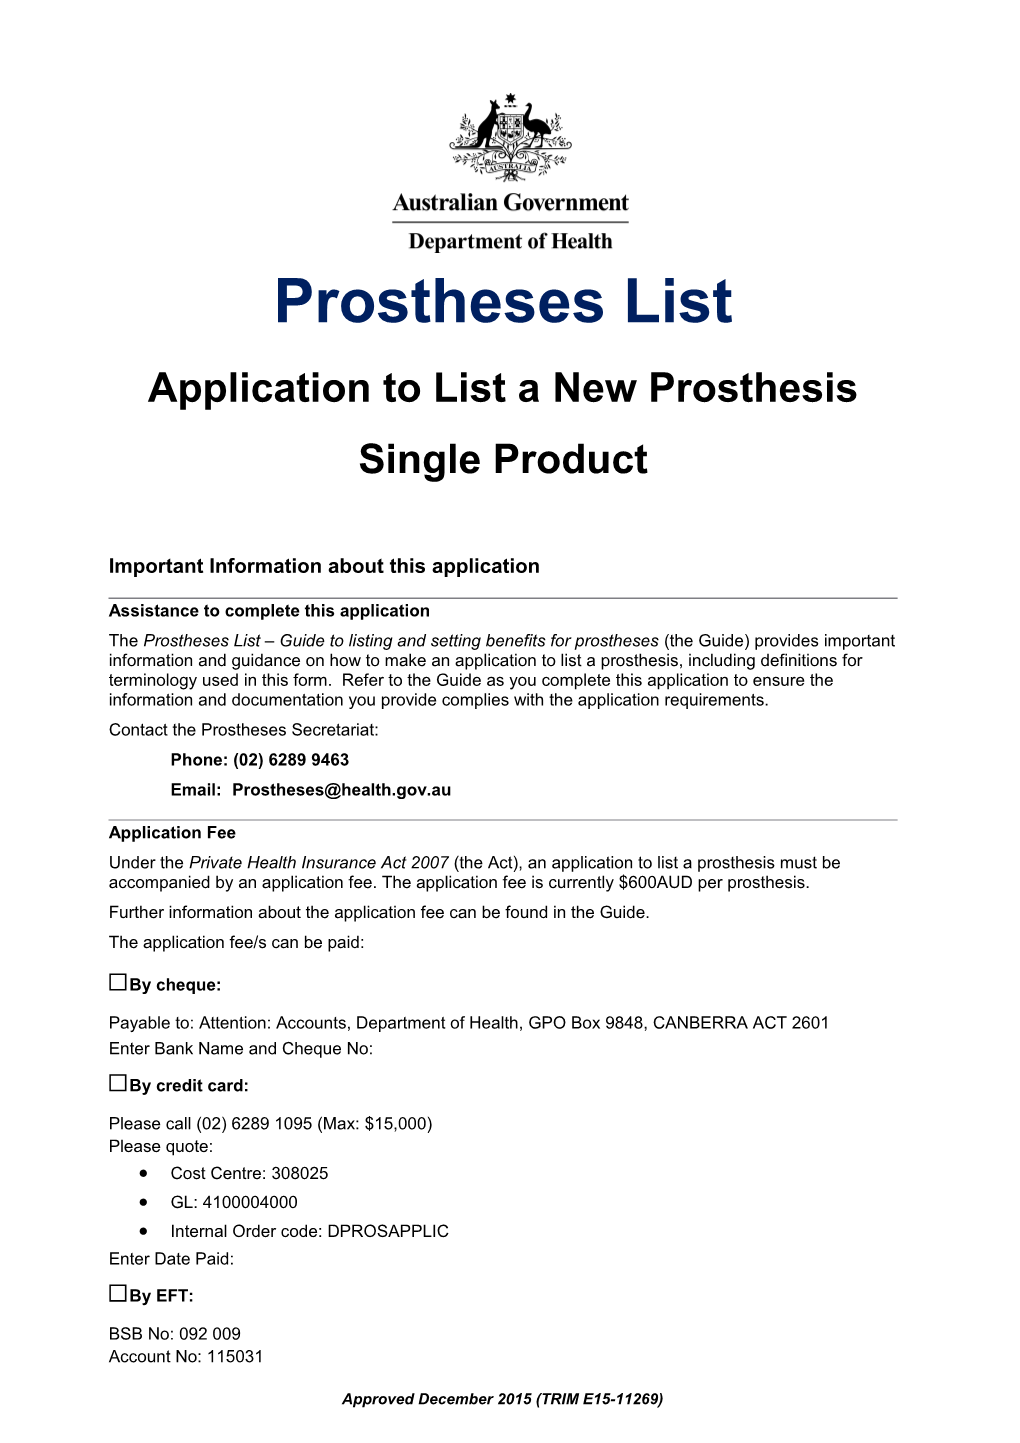 Application to List Anew Prosthesis